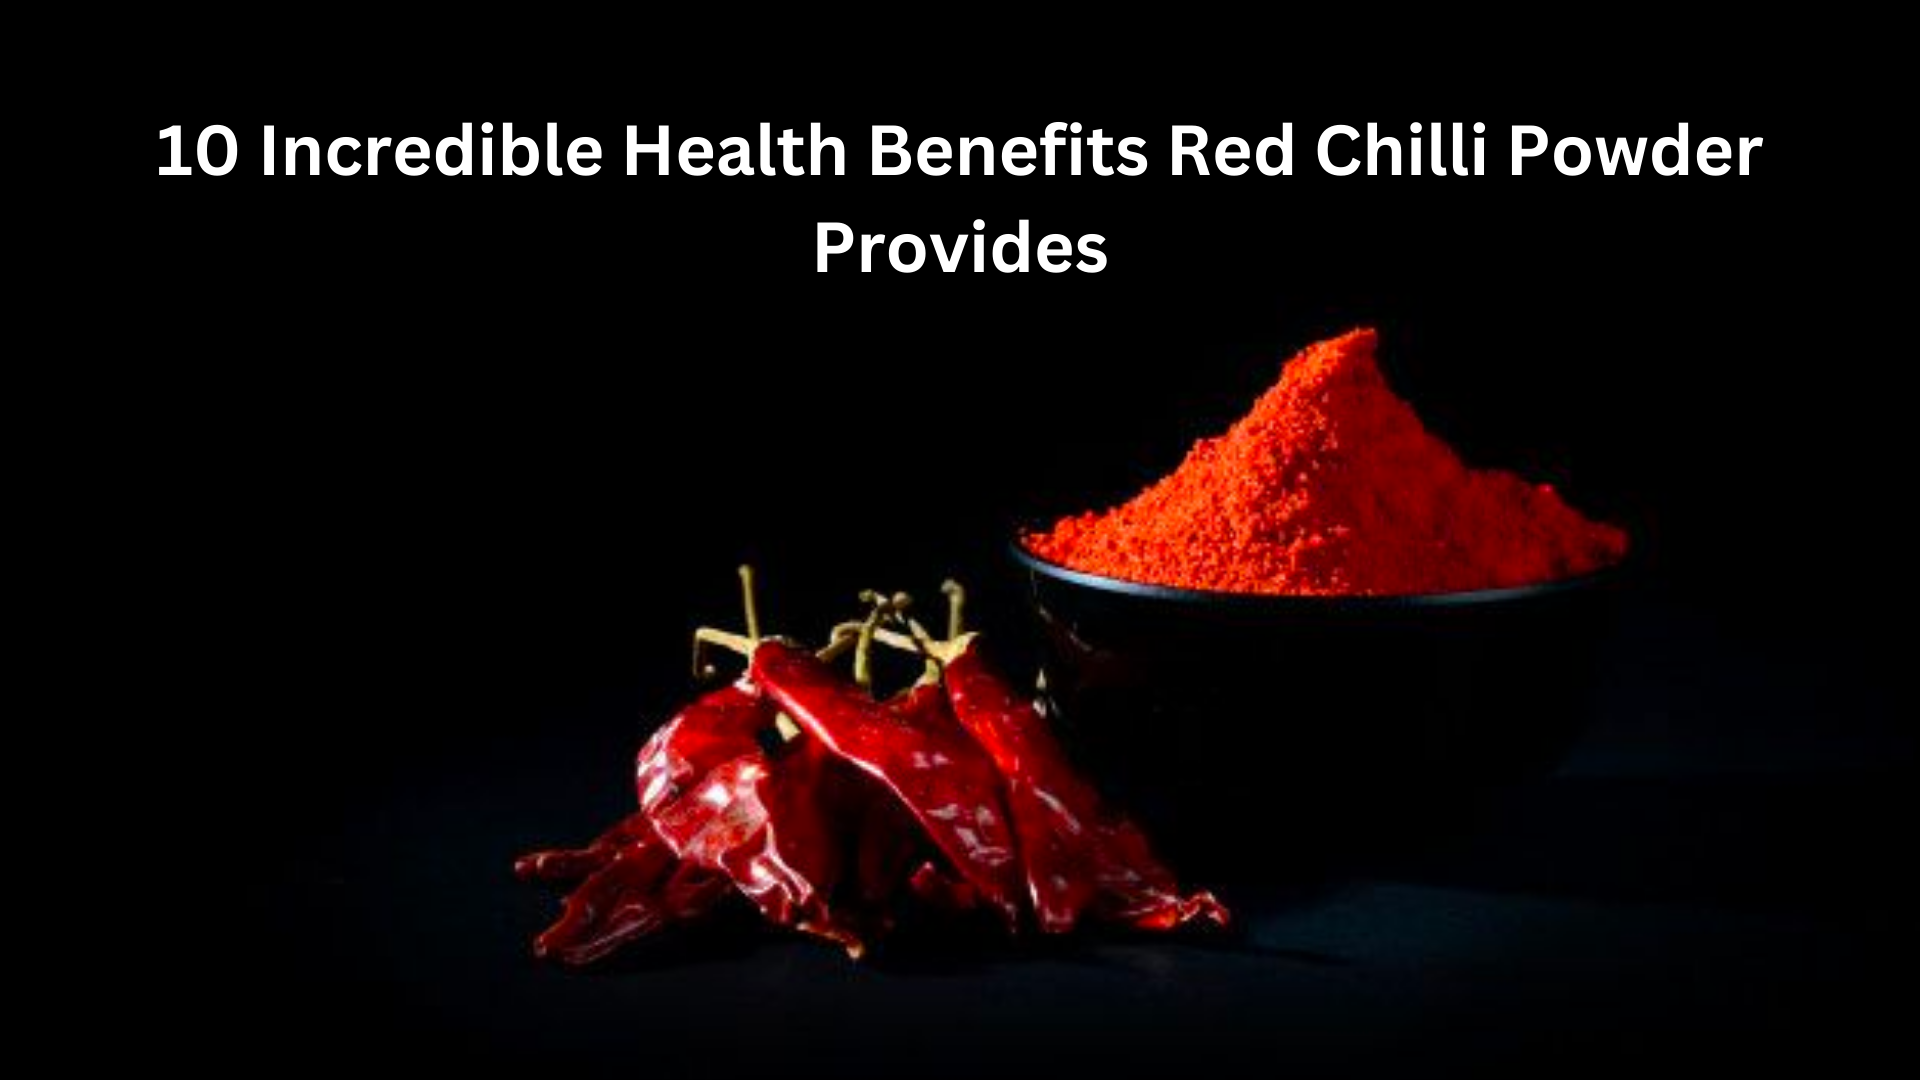 10 Incredible Health Benefits Red Chilli Powder Provides-52bd60a2